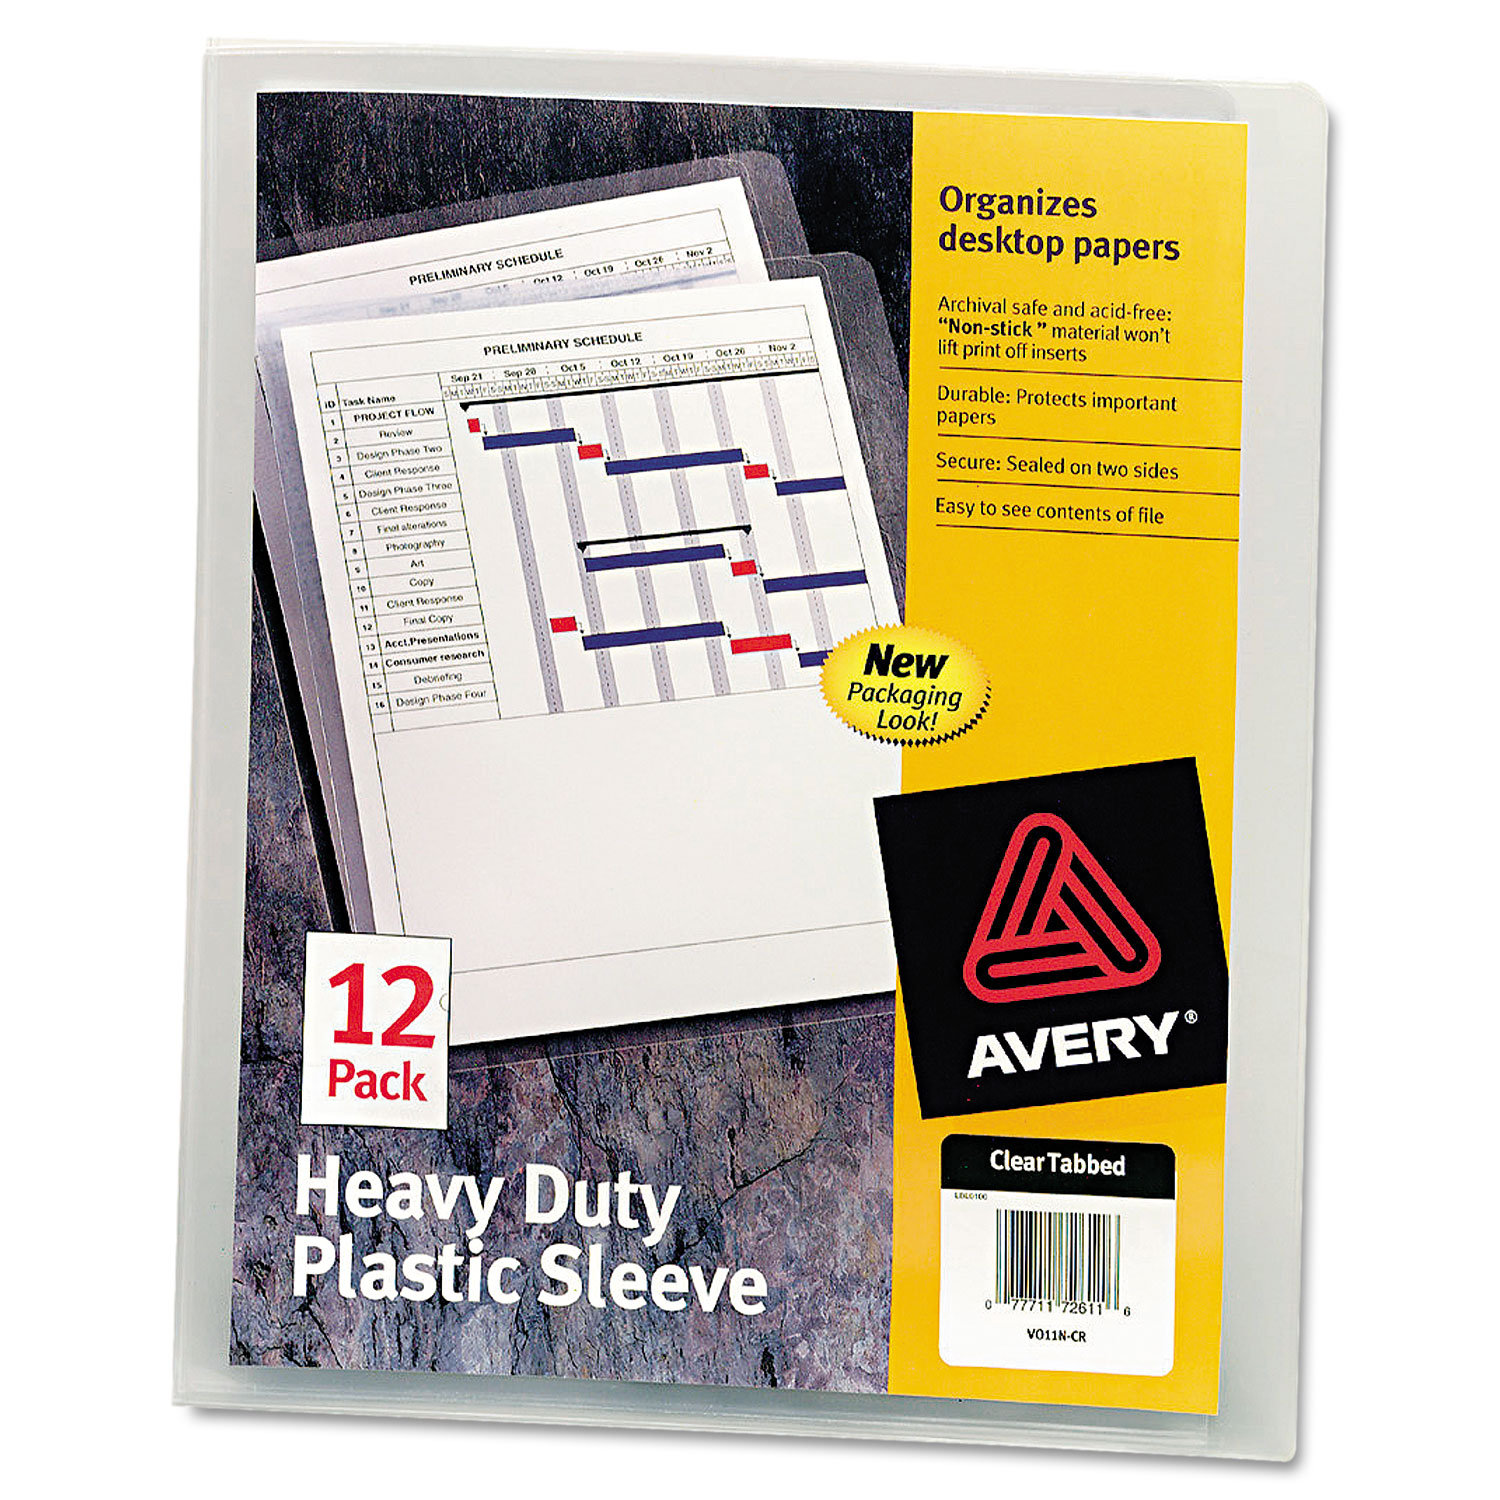  Avery 72611 Heavy-Duty Plastic Sleeves, Letter Size, Clear, 12/Pack (AVE72611) 